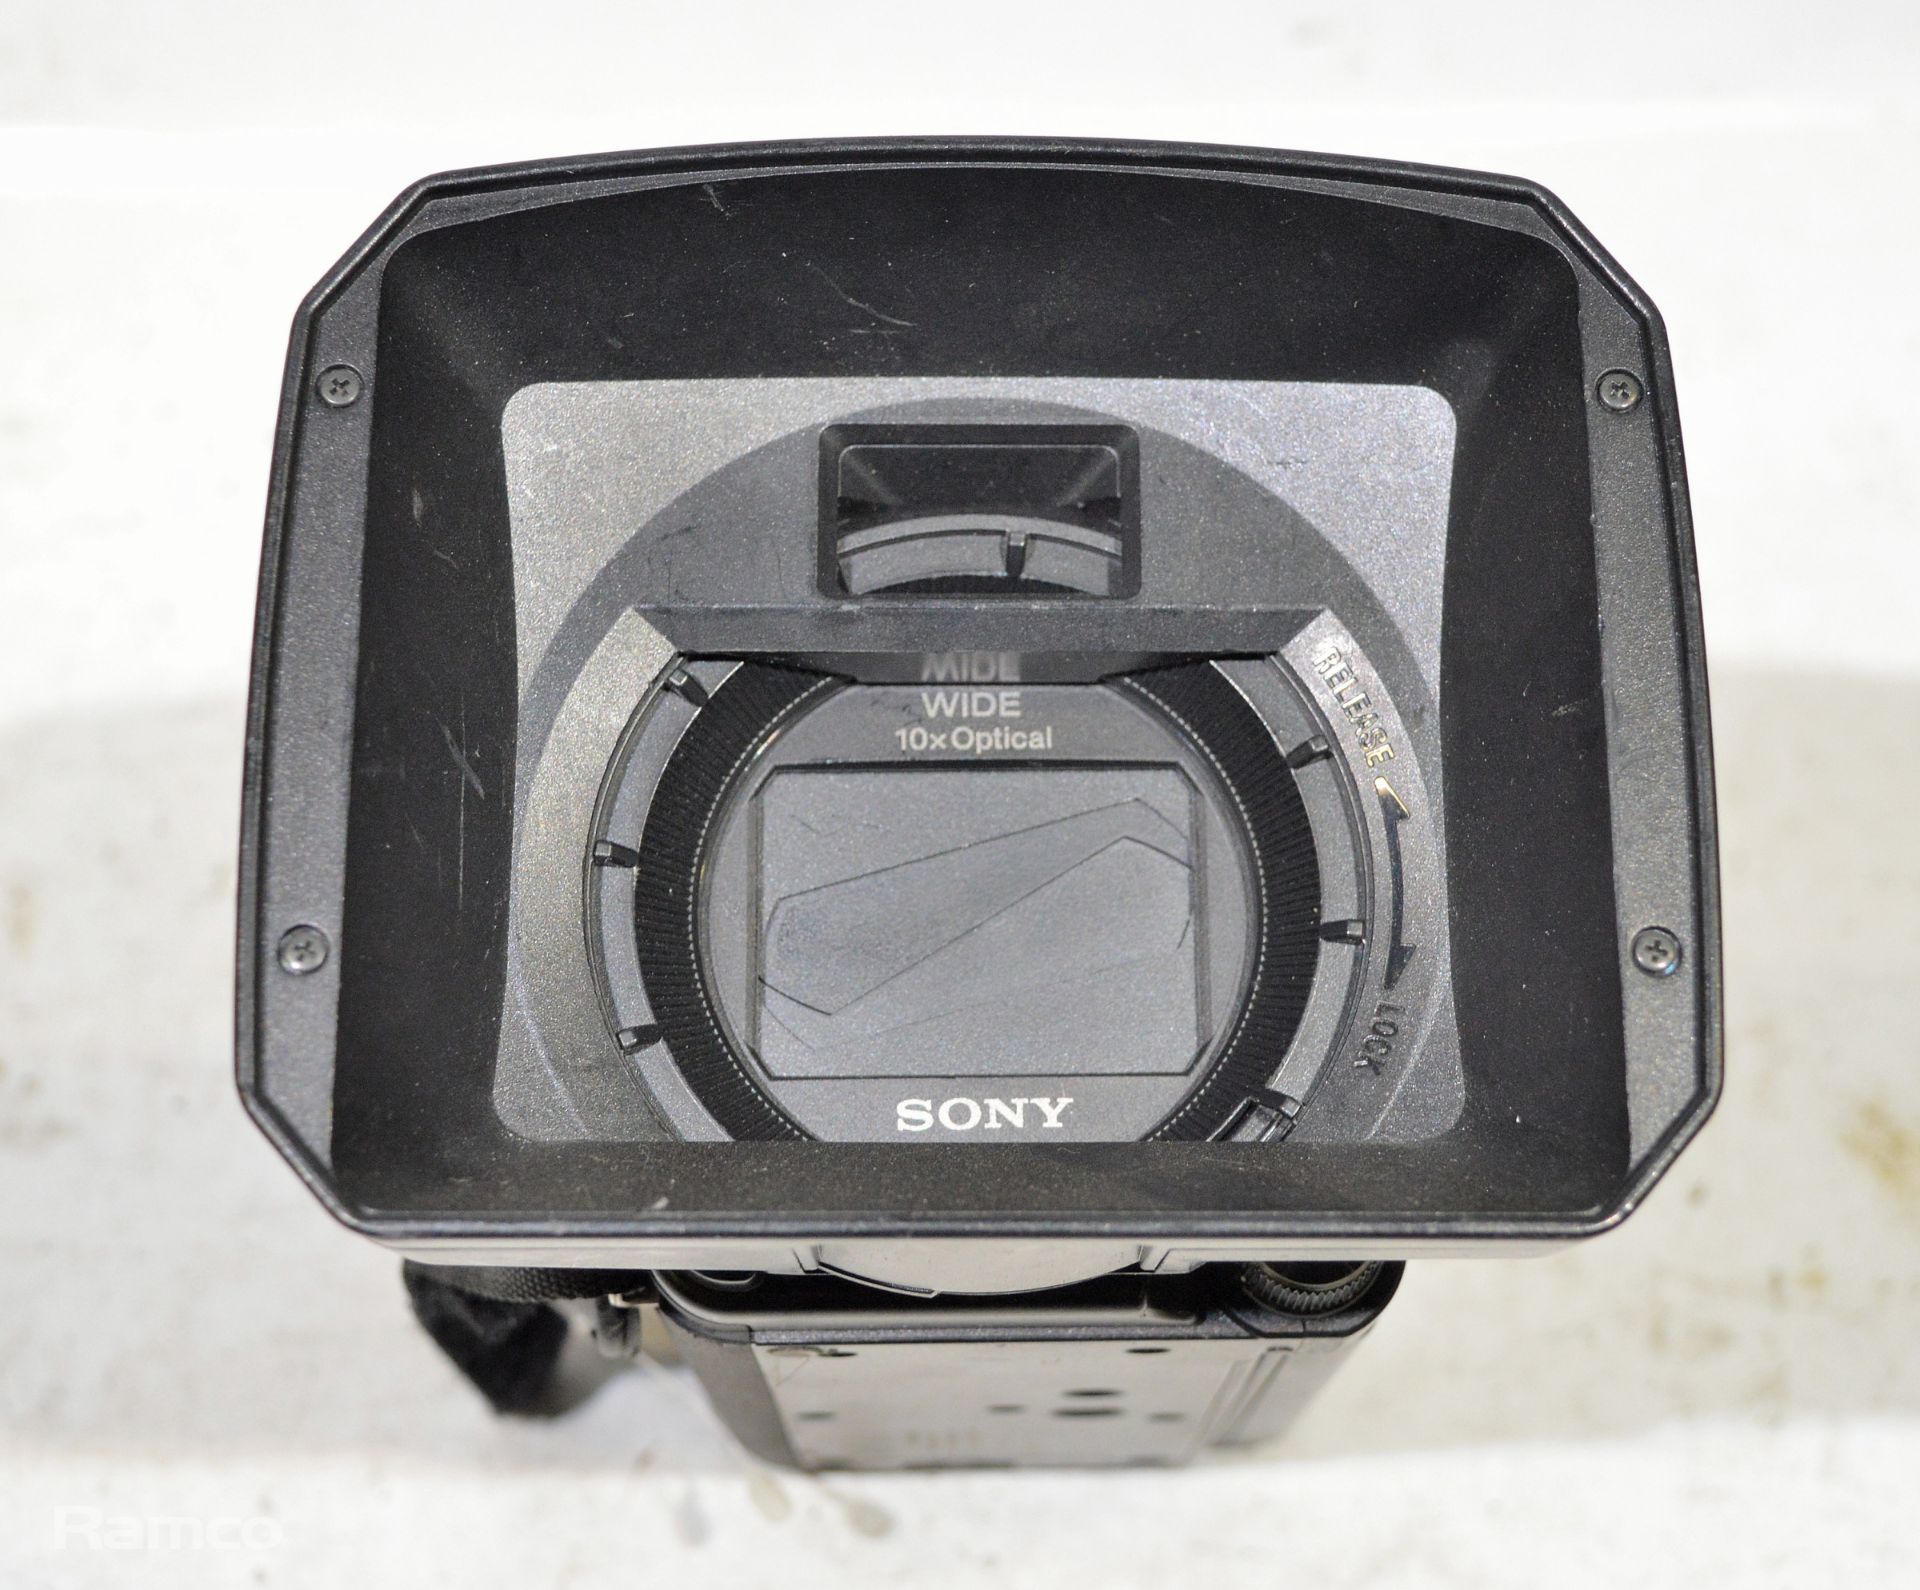 3x Sony HDR-CX730 Handycams 24.1megapixel - Image 8 of 8